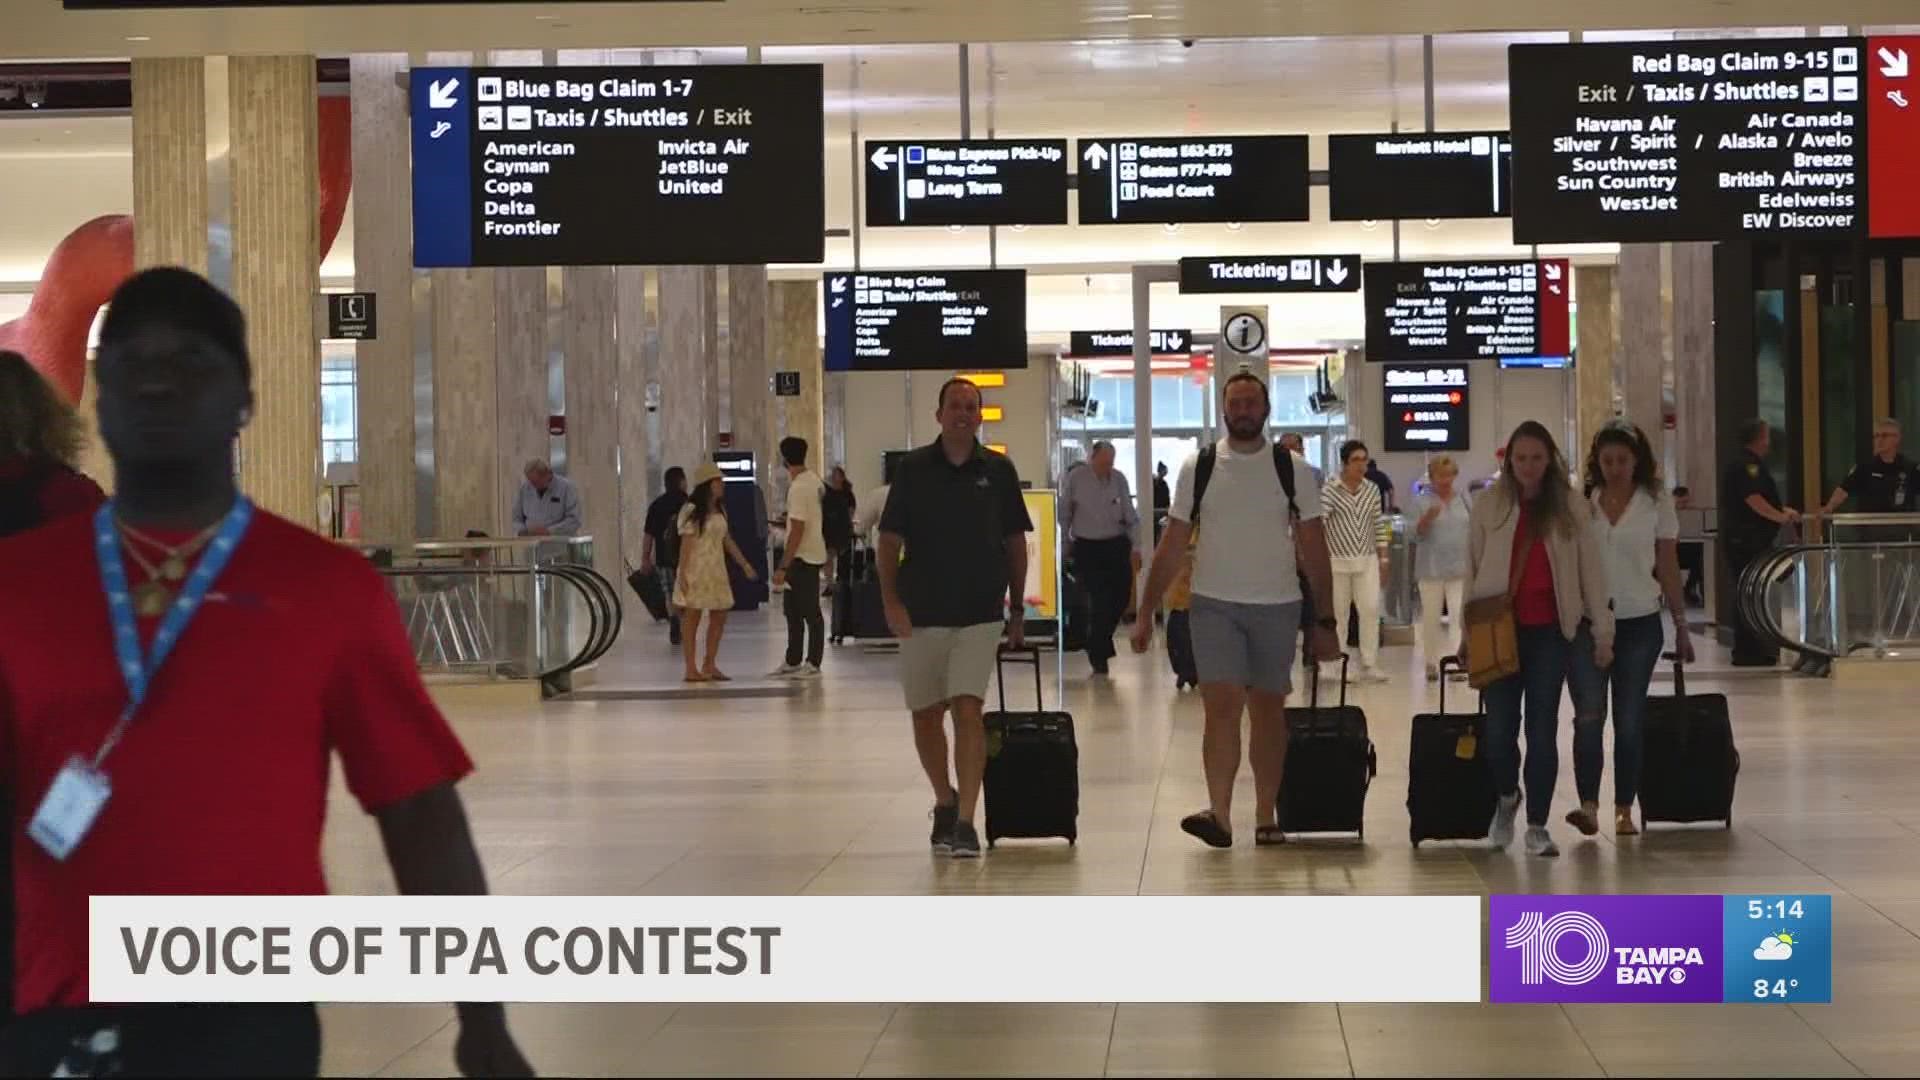 Last year was the first year for the voice of TPA contest, but there were far fewer passengers and participants.